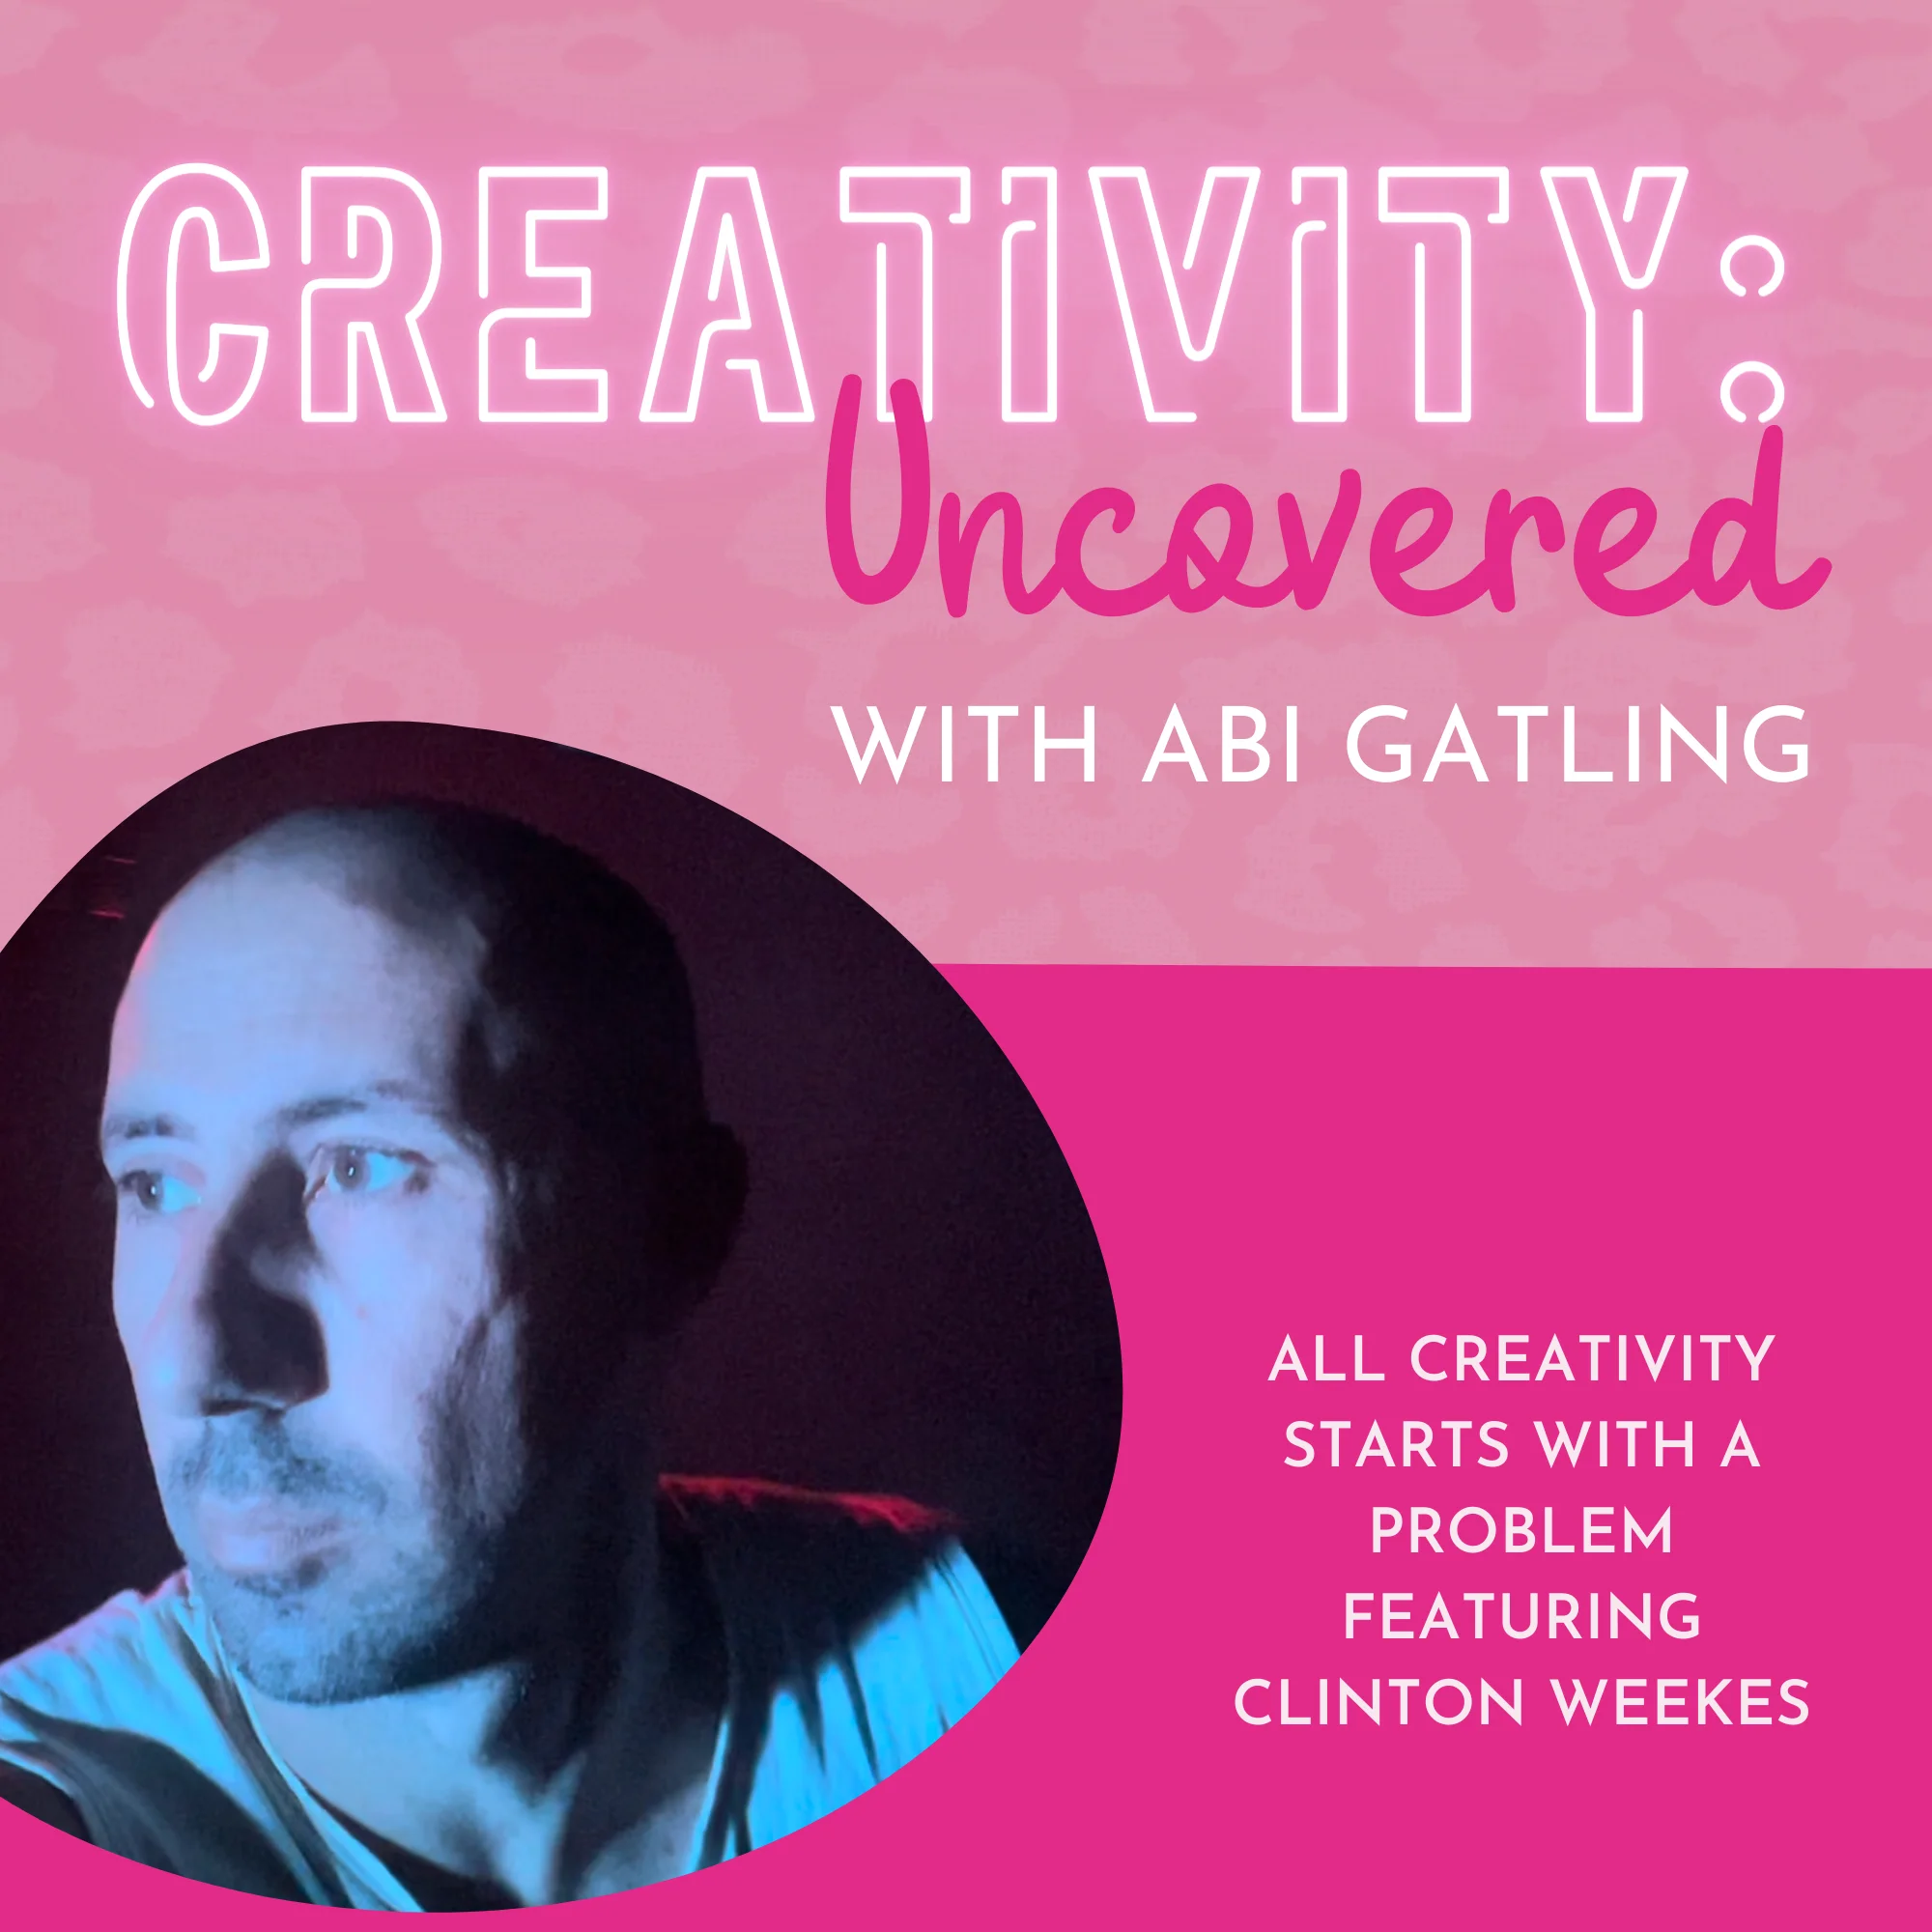 Creativity: Uncovered podcast episode graphic featuring guest Clinton Weekes